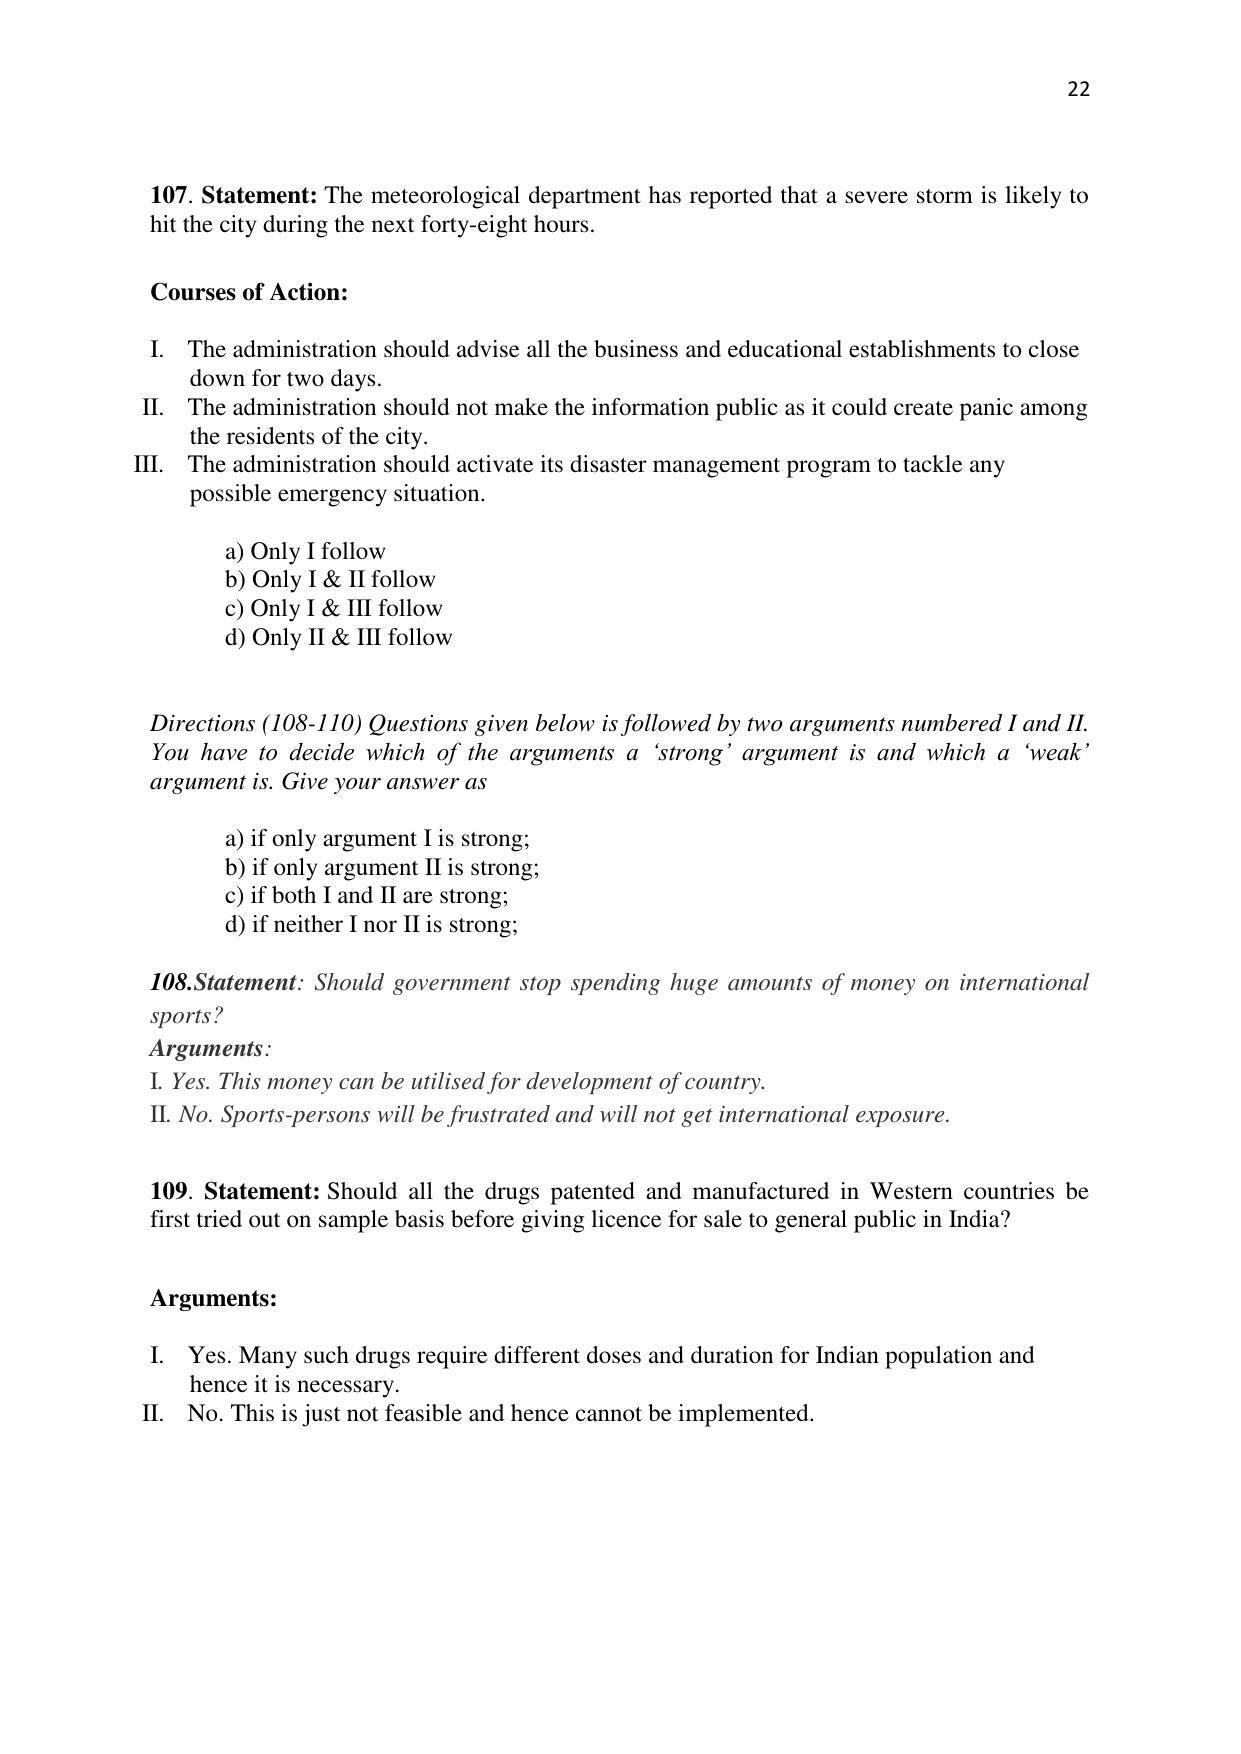 KMAT Question Papers - November 2016 - Page 22